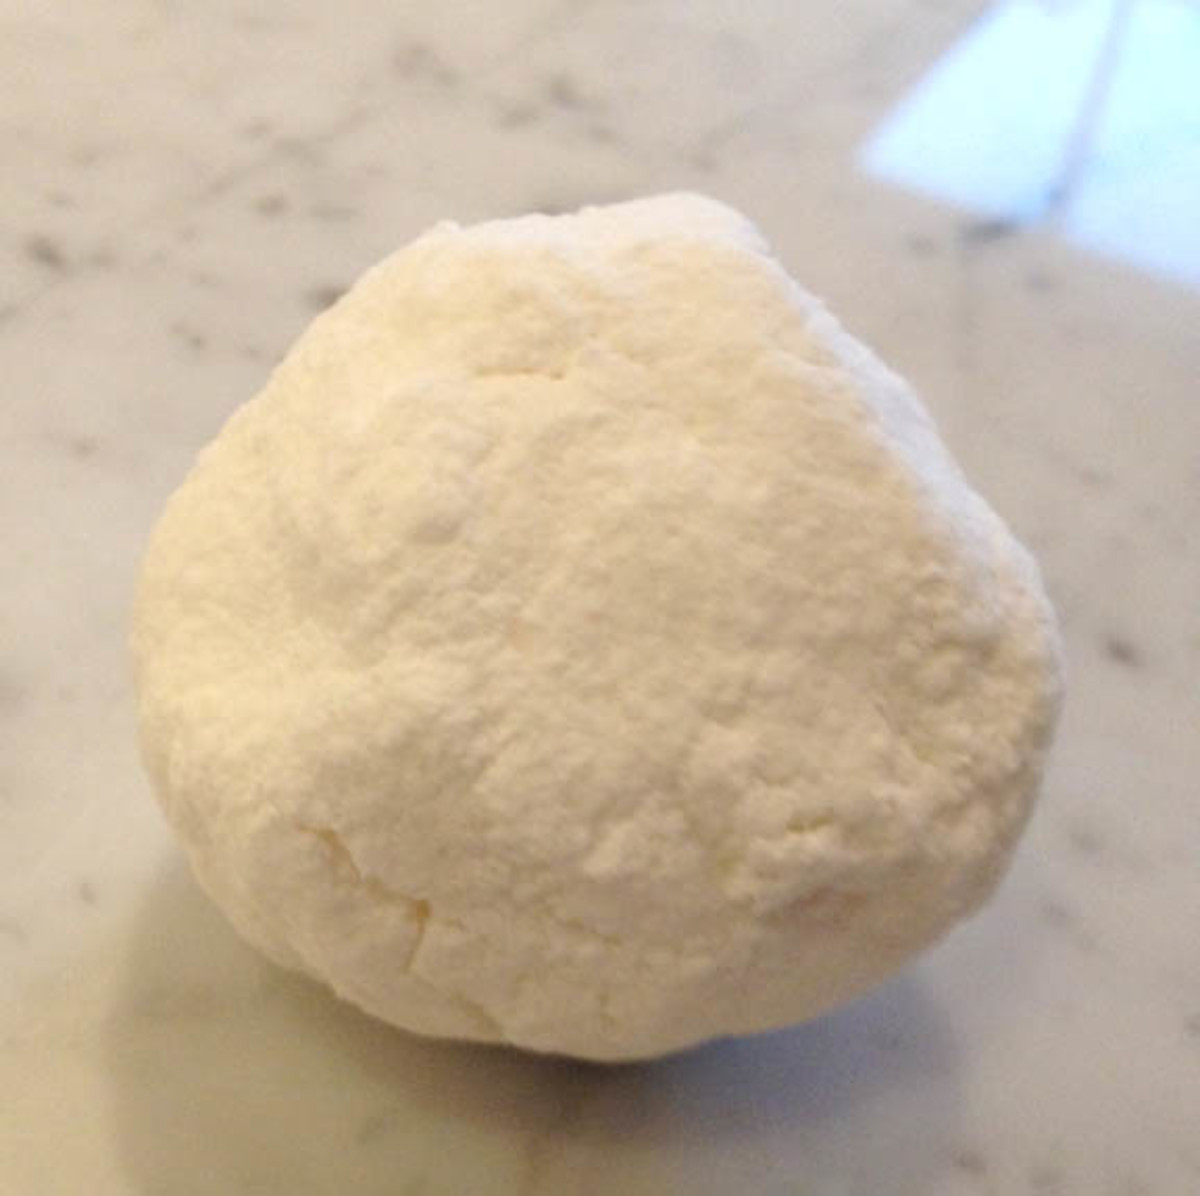 Here is one of the bath balls I made. Simply shape a ball from the powder once you have misted it.